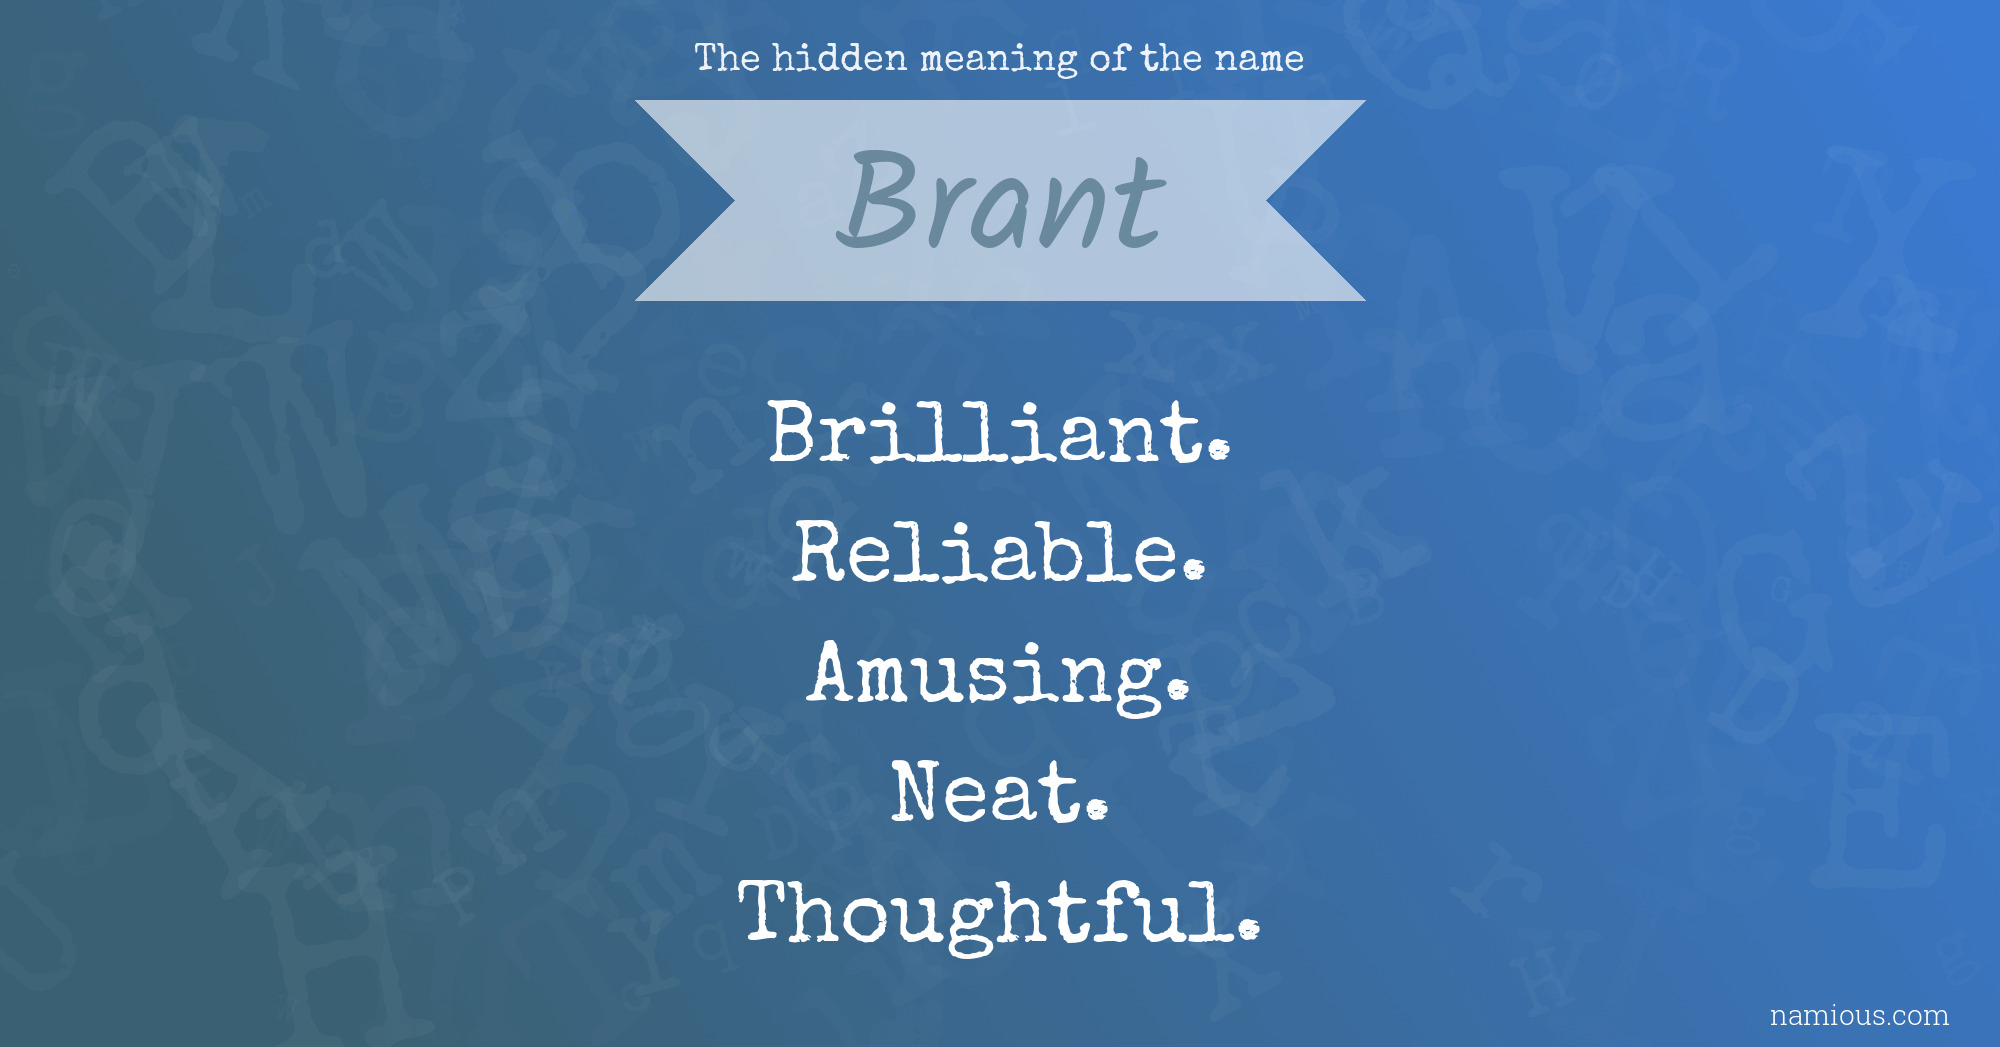 The hidden meaning of the name Brant